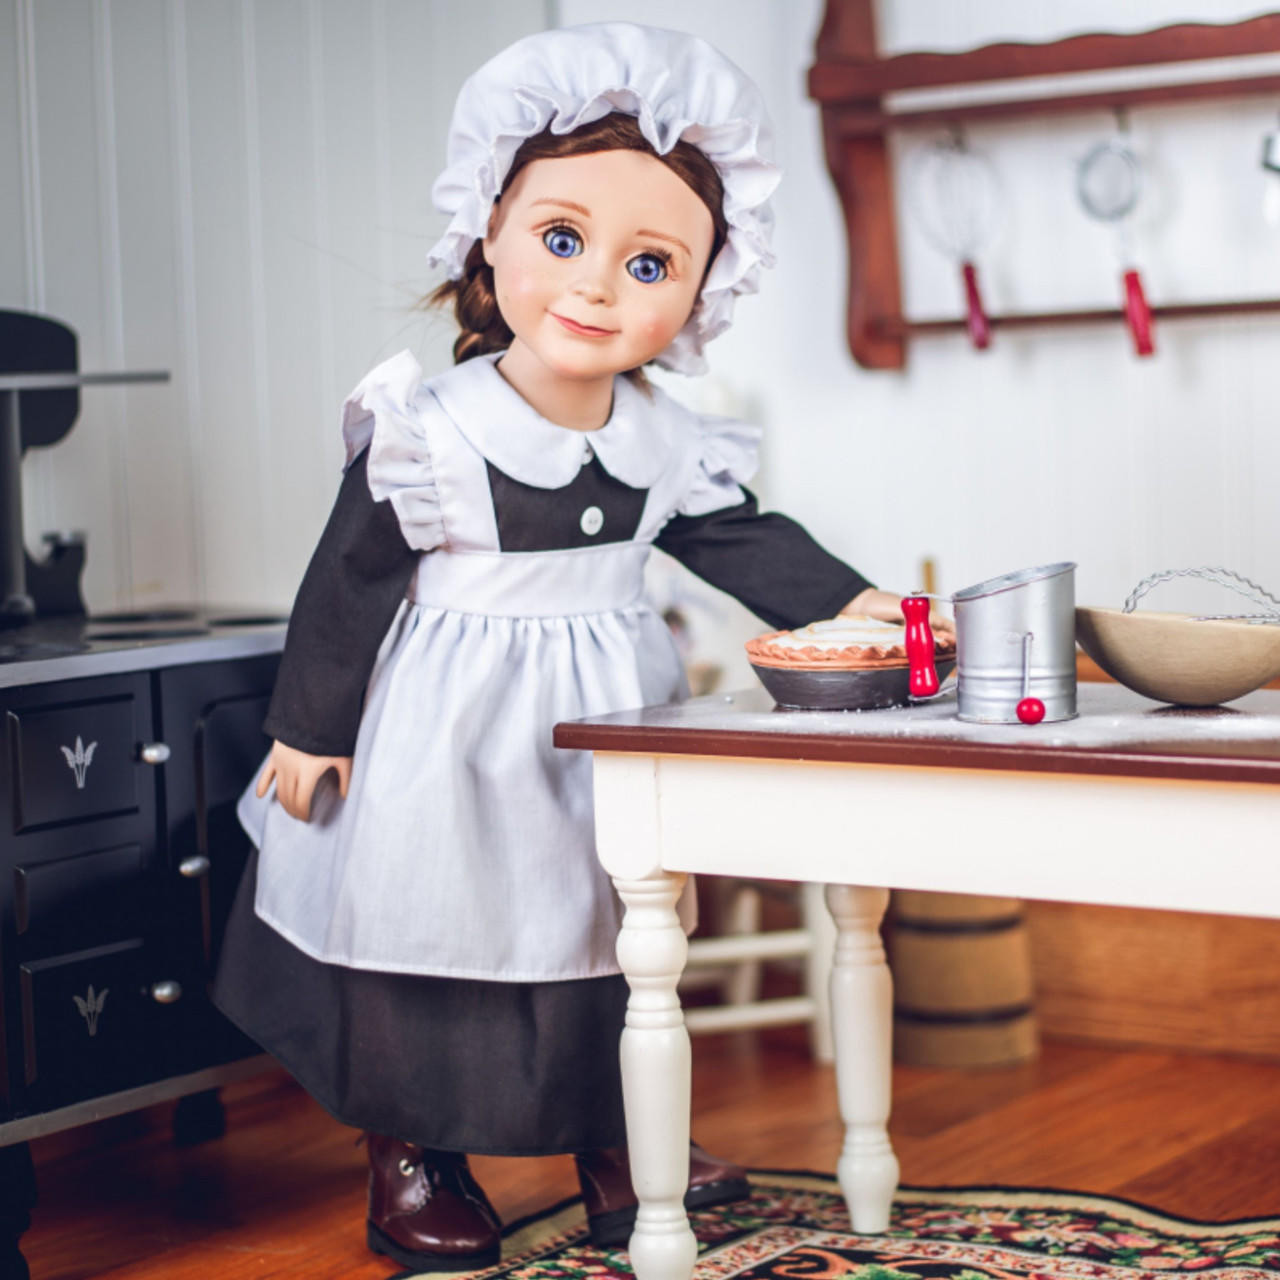 https://cdn11.bigcommerce.com/s-m5vcu70215/images/stencil/1280x1280/products/266/2613/the-queens-treasures-5-piece-kitchen-maid-clothes-outfit-with-boots-for-18-dolls__95921.1692302744.jpg?c=1